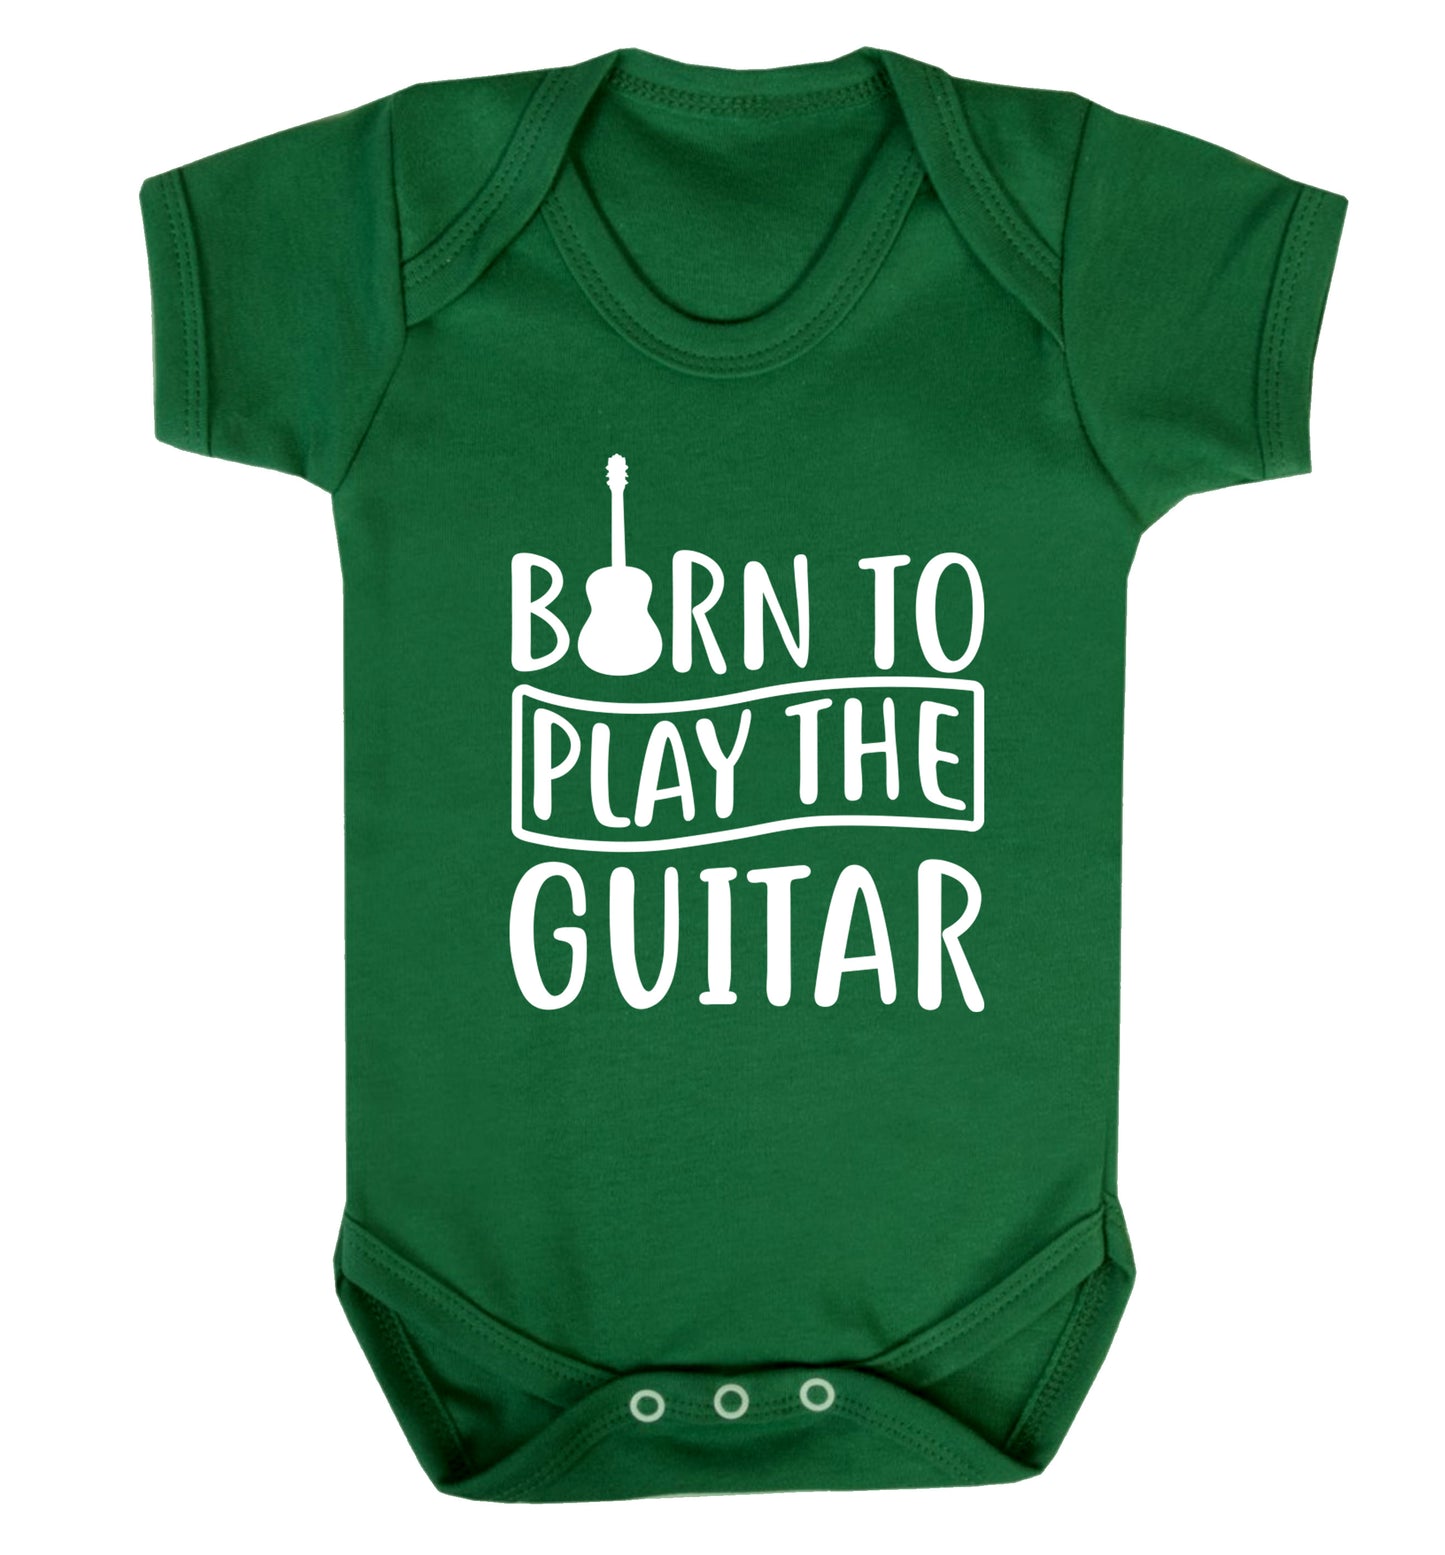 Born to play the guitar Baby Vest green 18-24 months